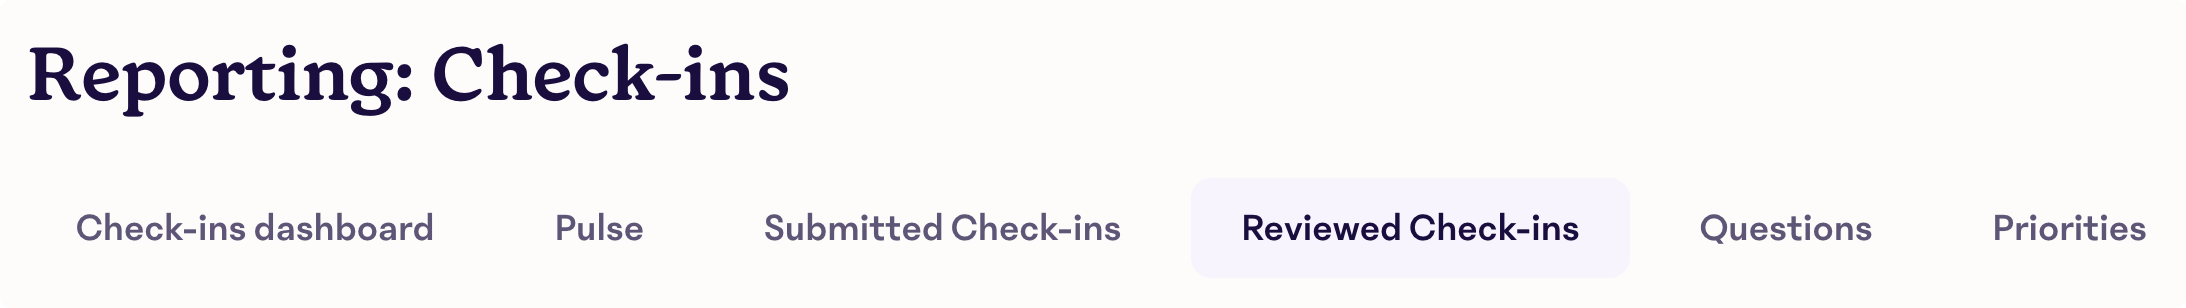 Reviewed-Check-ins-Tab.png